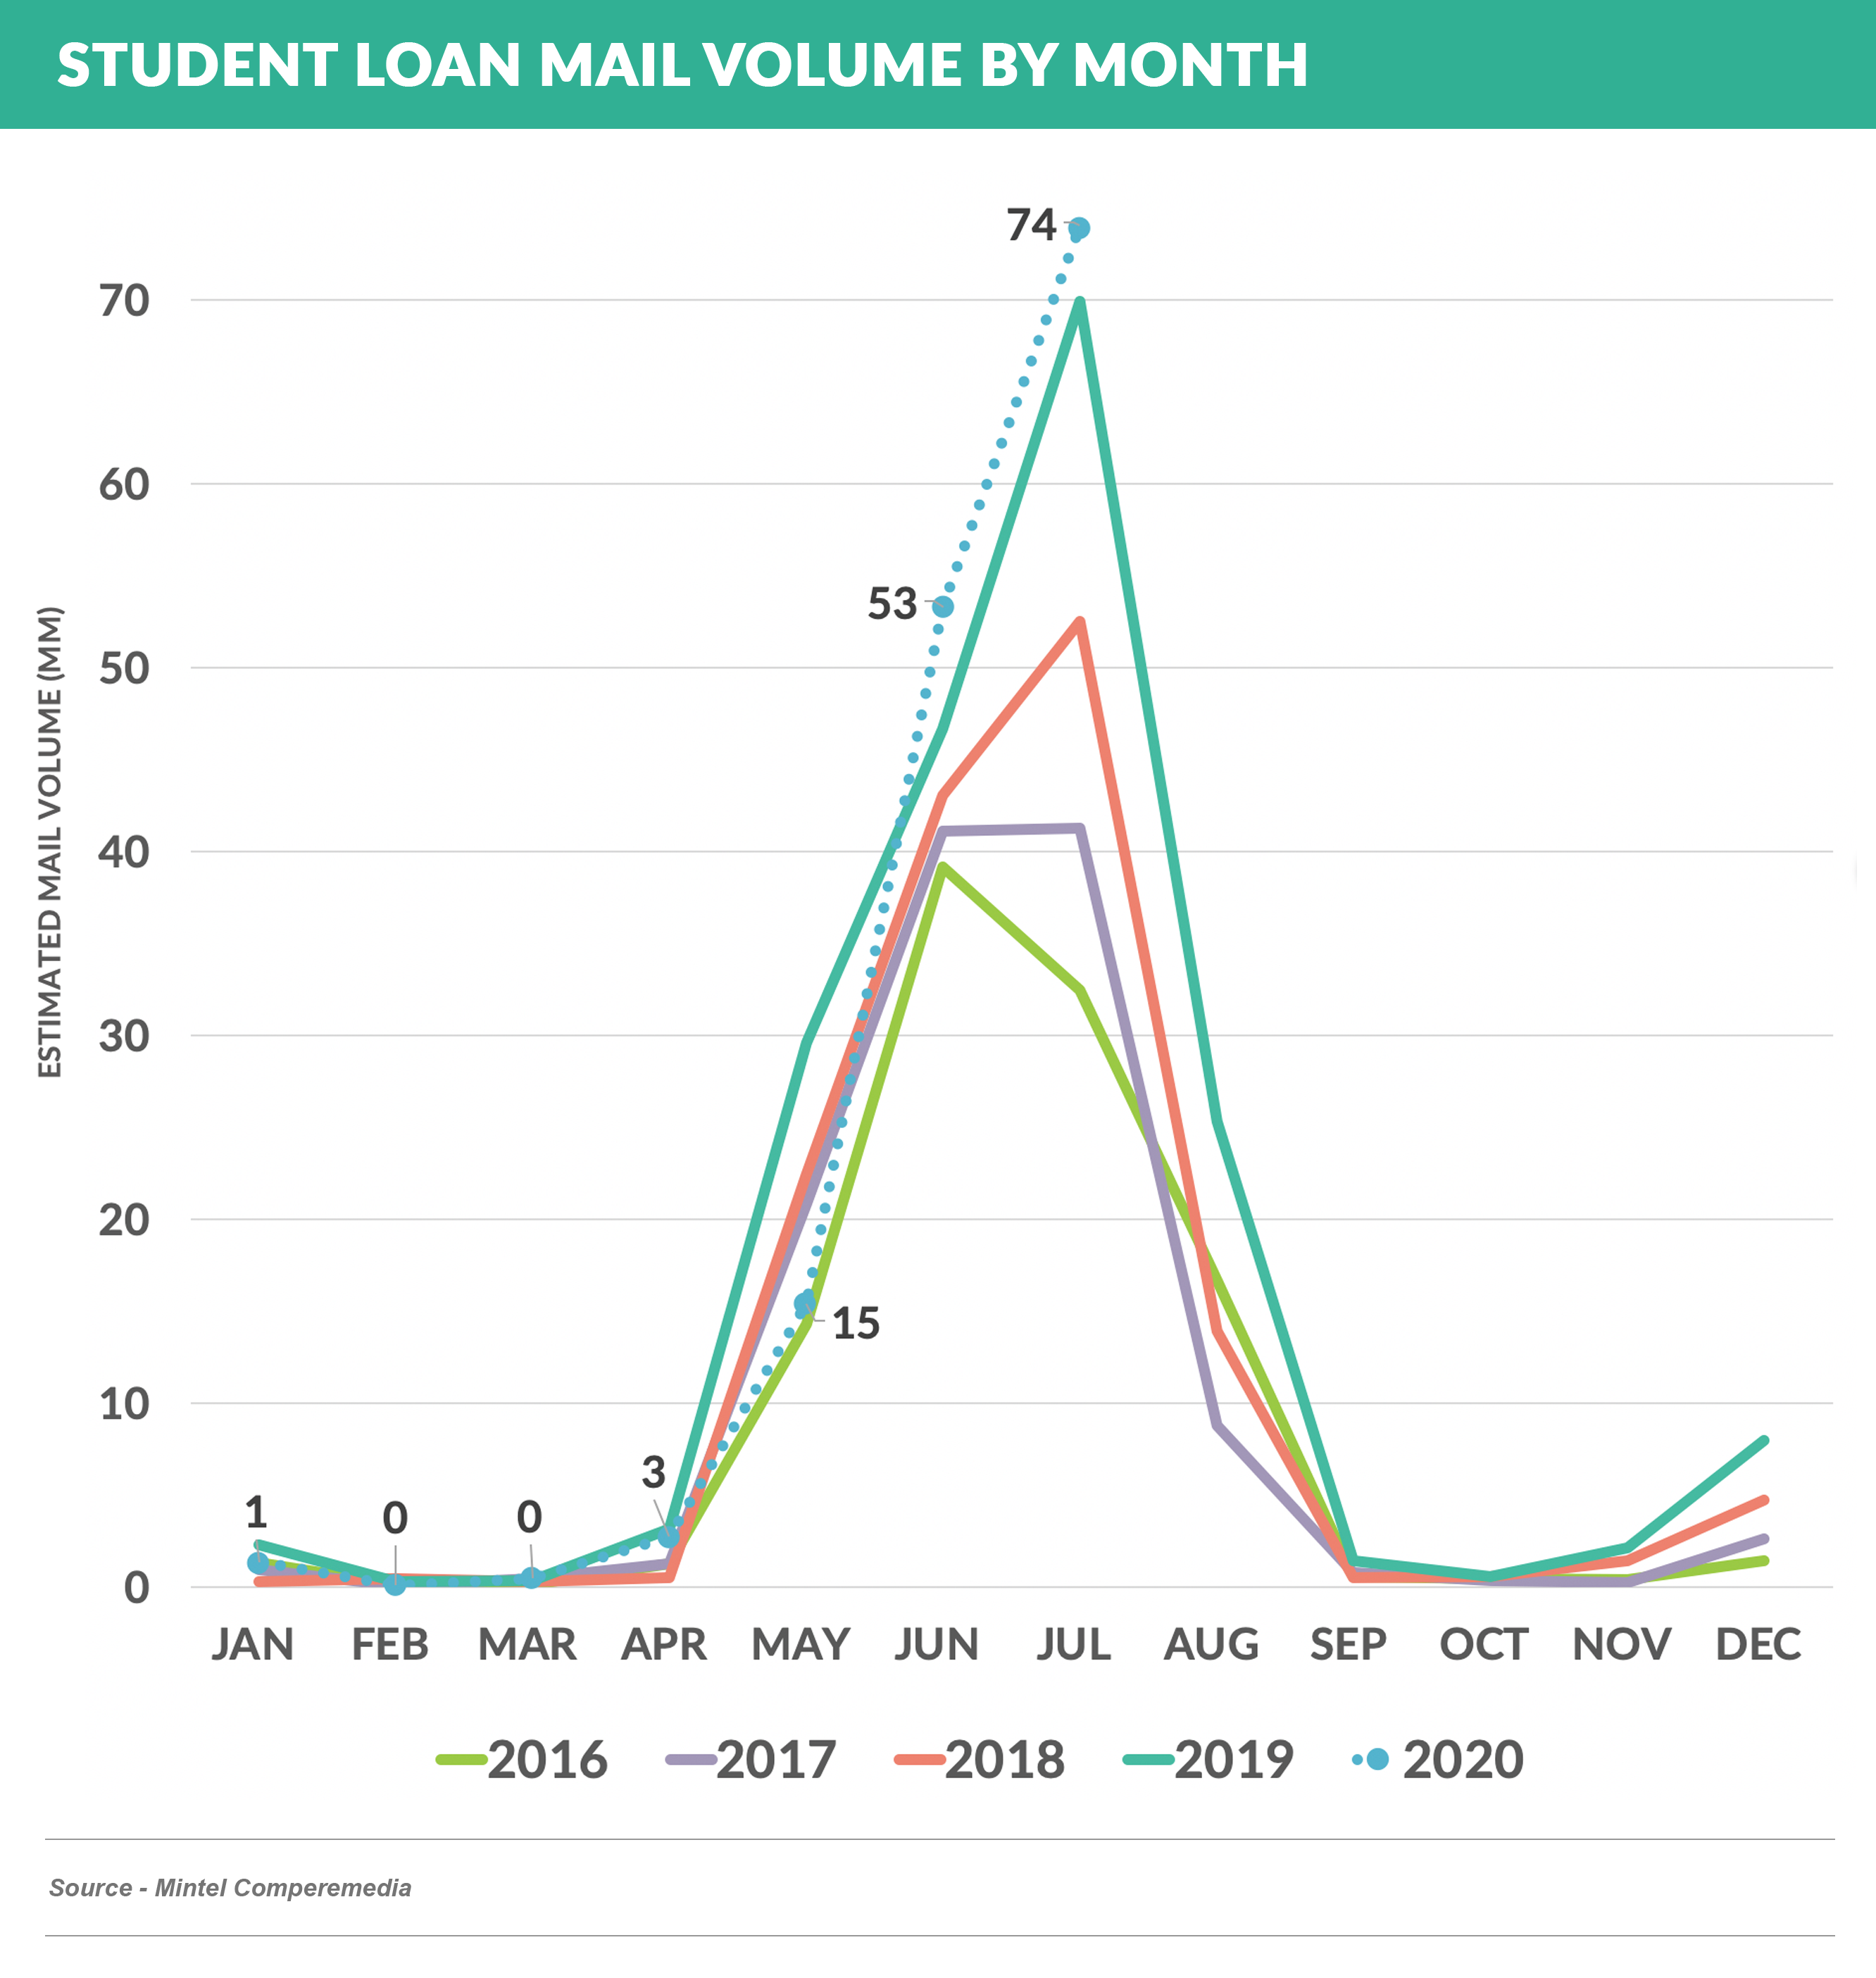 Private Student Loan mail volume by month (1)